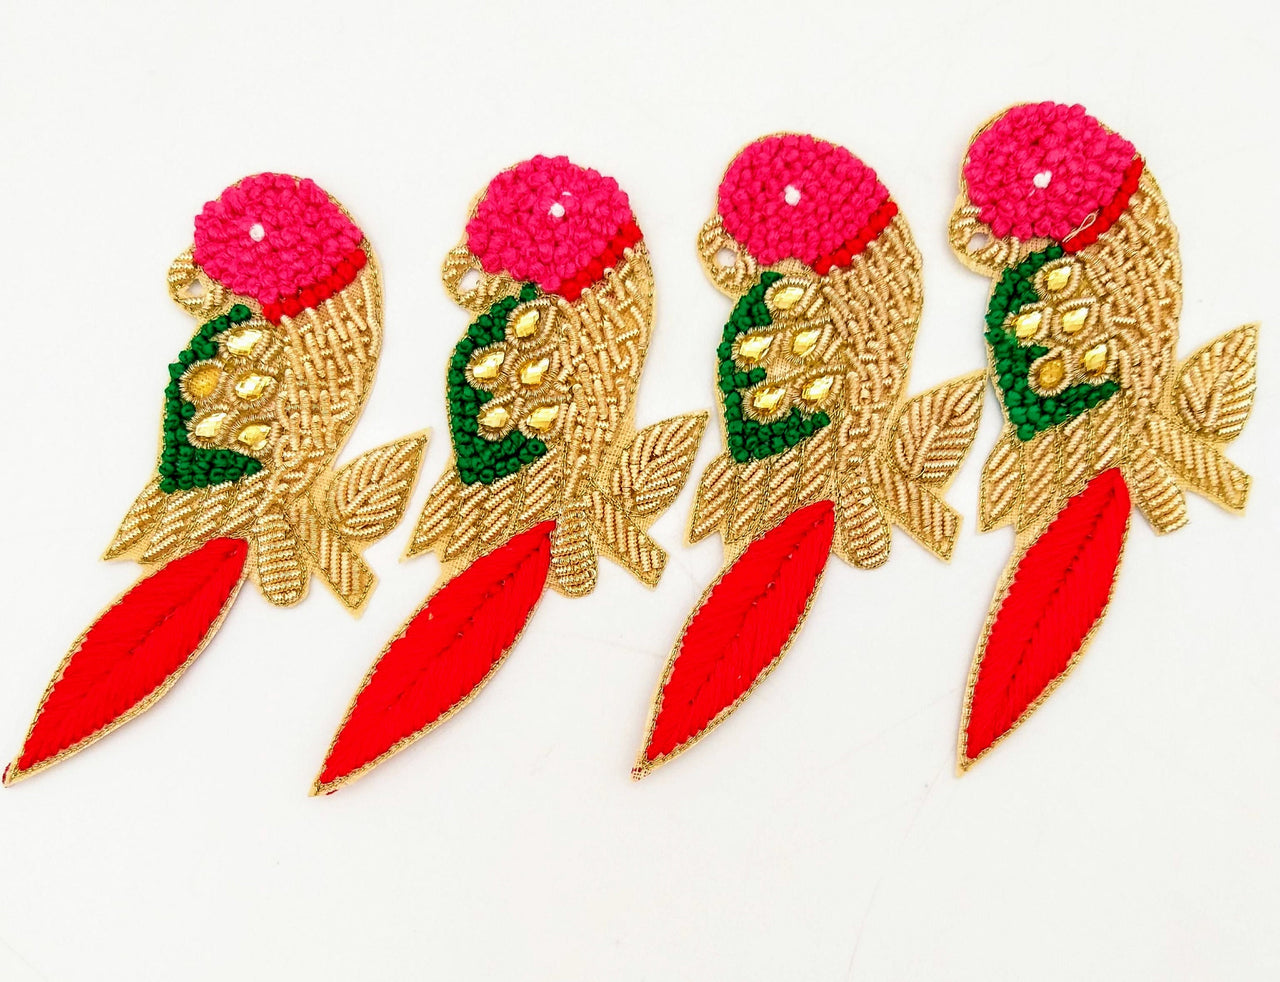 Hand Embroidered Bird Applique With Pink and Red Embroidery With Antique Gold Zardozi Work, Parrot Applique, Knot Embroidered Applique